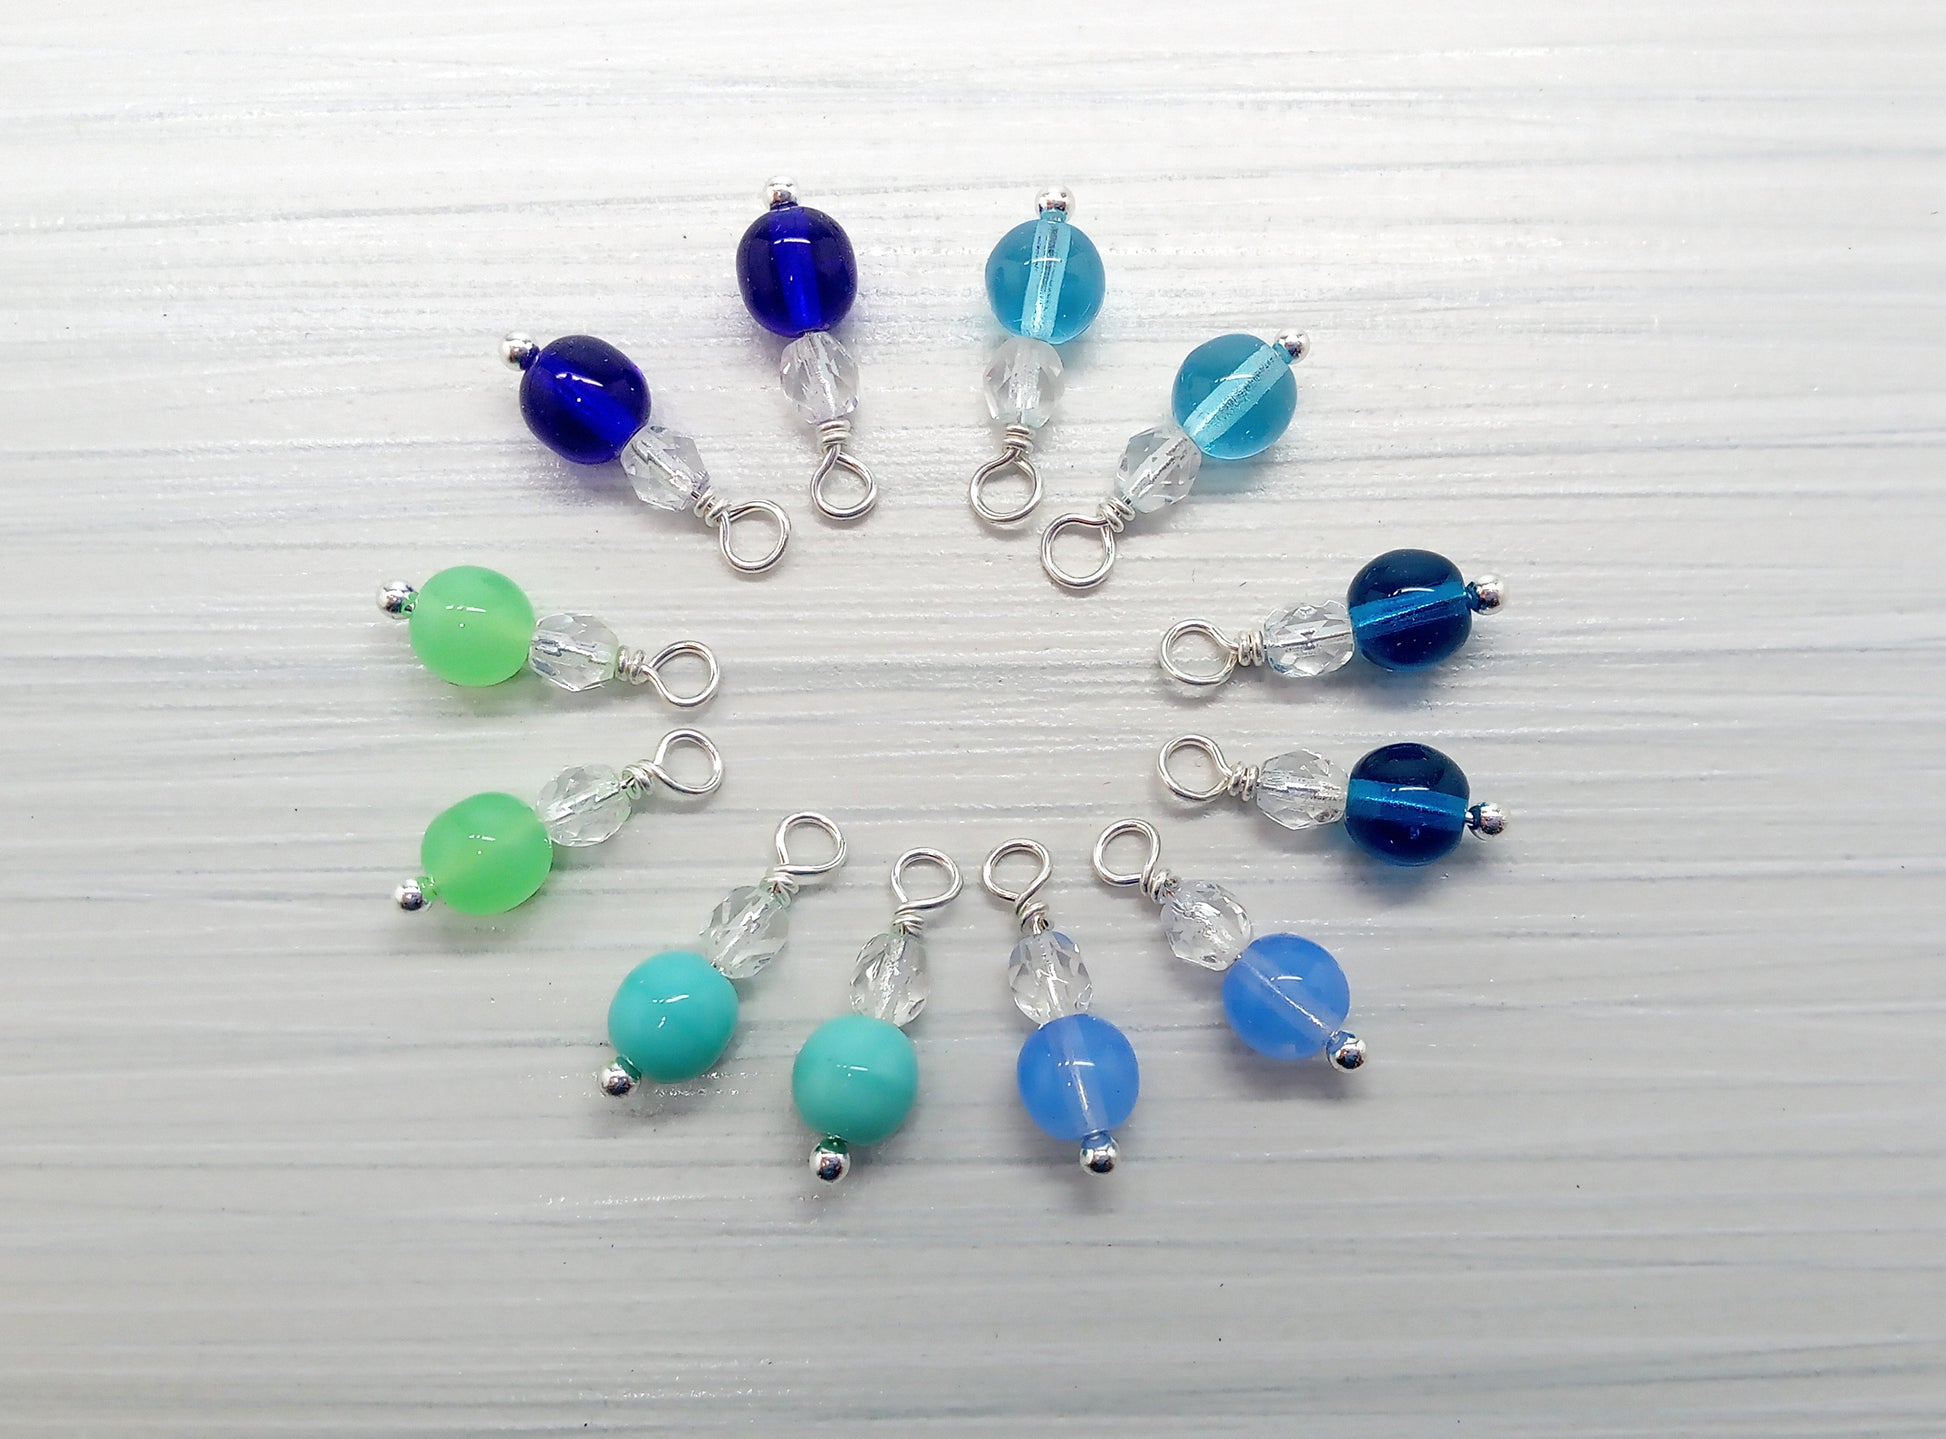 Bead Charms for Earrings - 6 pairs of Pretty Dangles in Blues - Adorabilities Charms & Trinkets